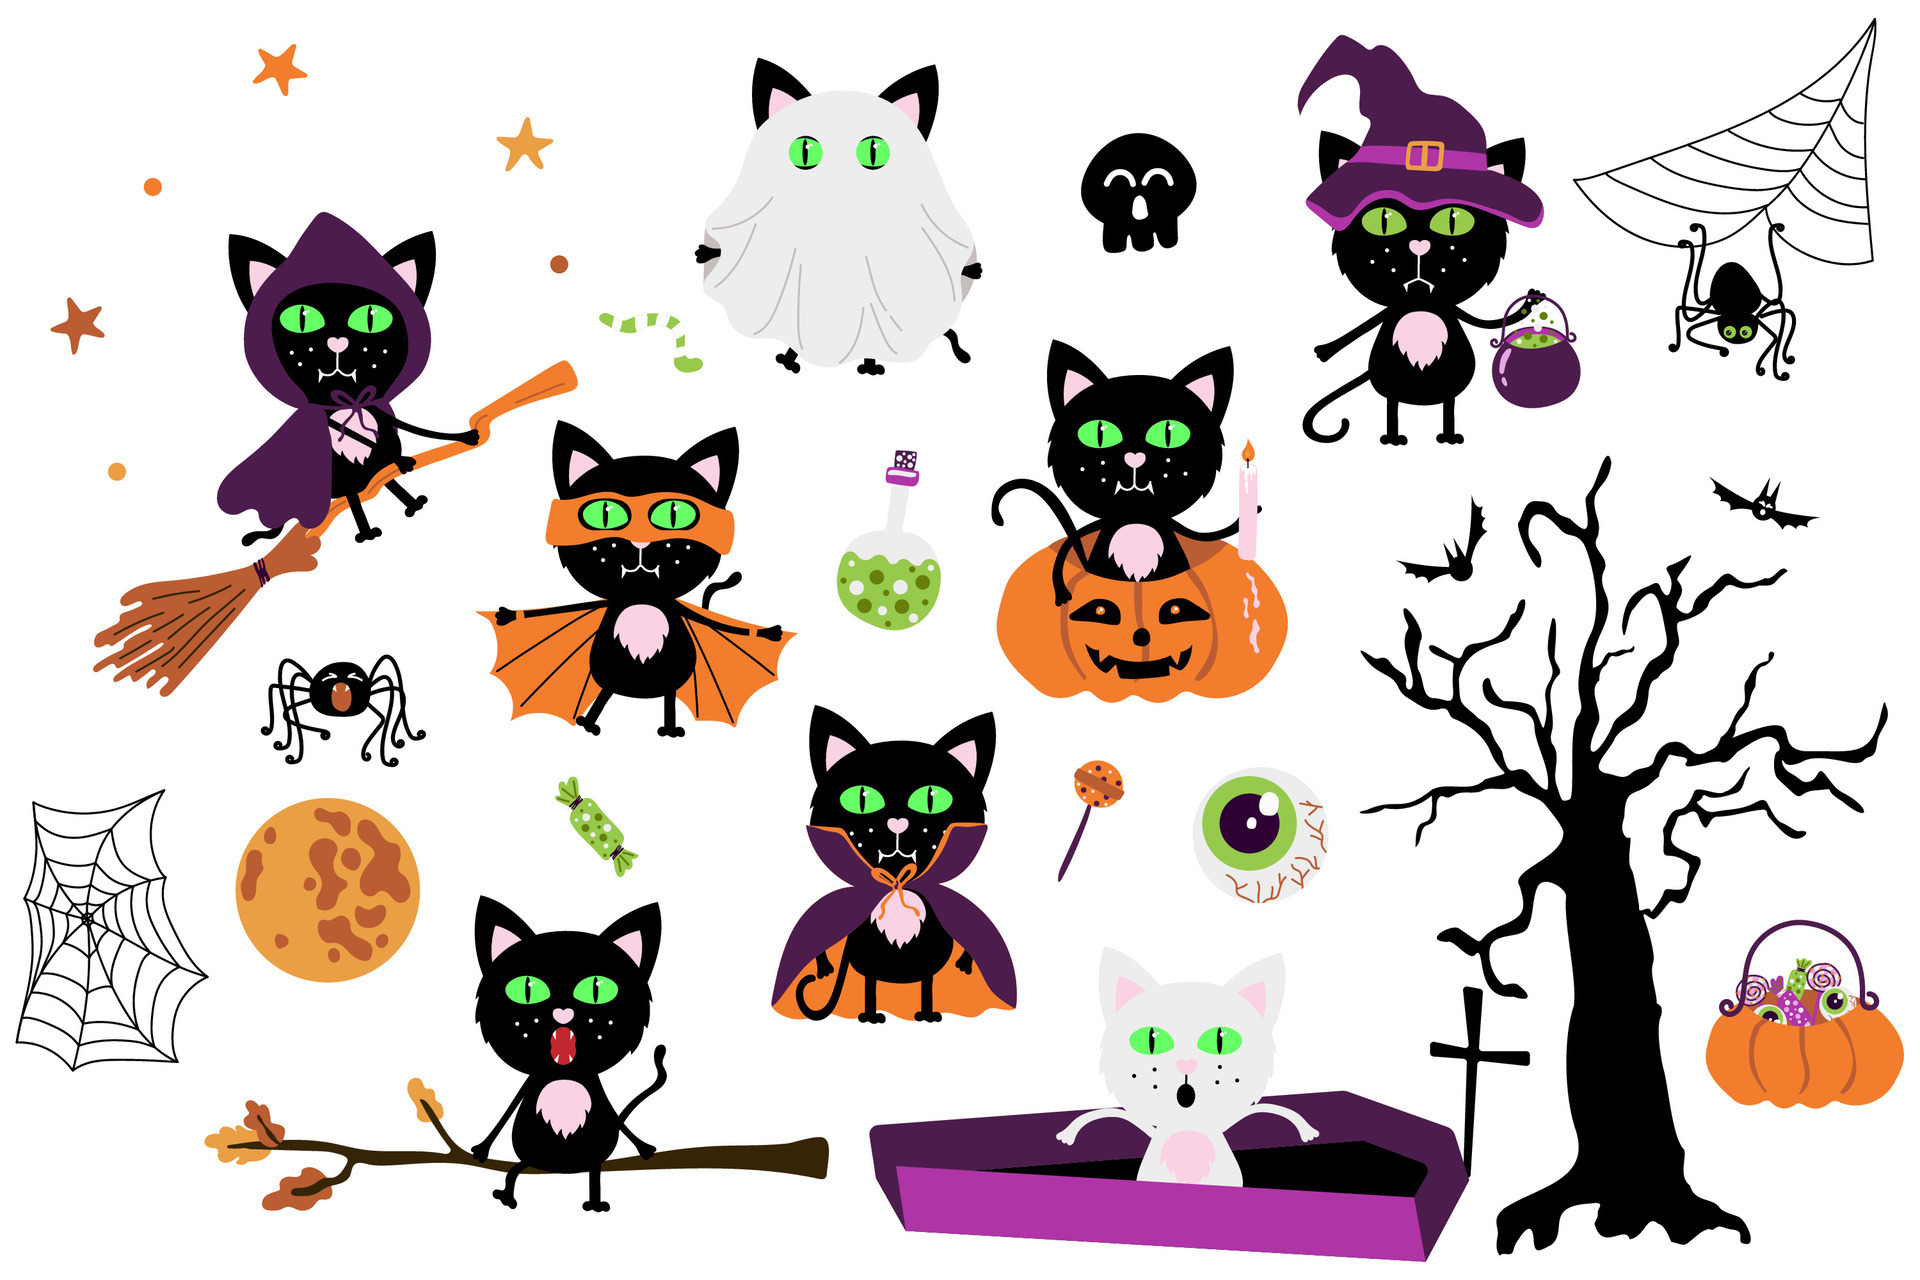 Silly cat stickers Halloween set